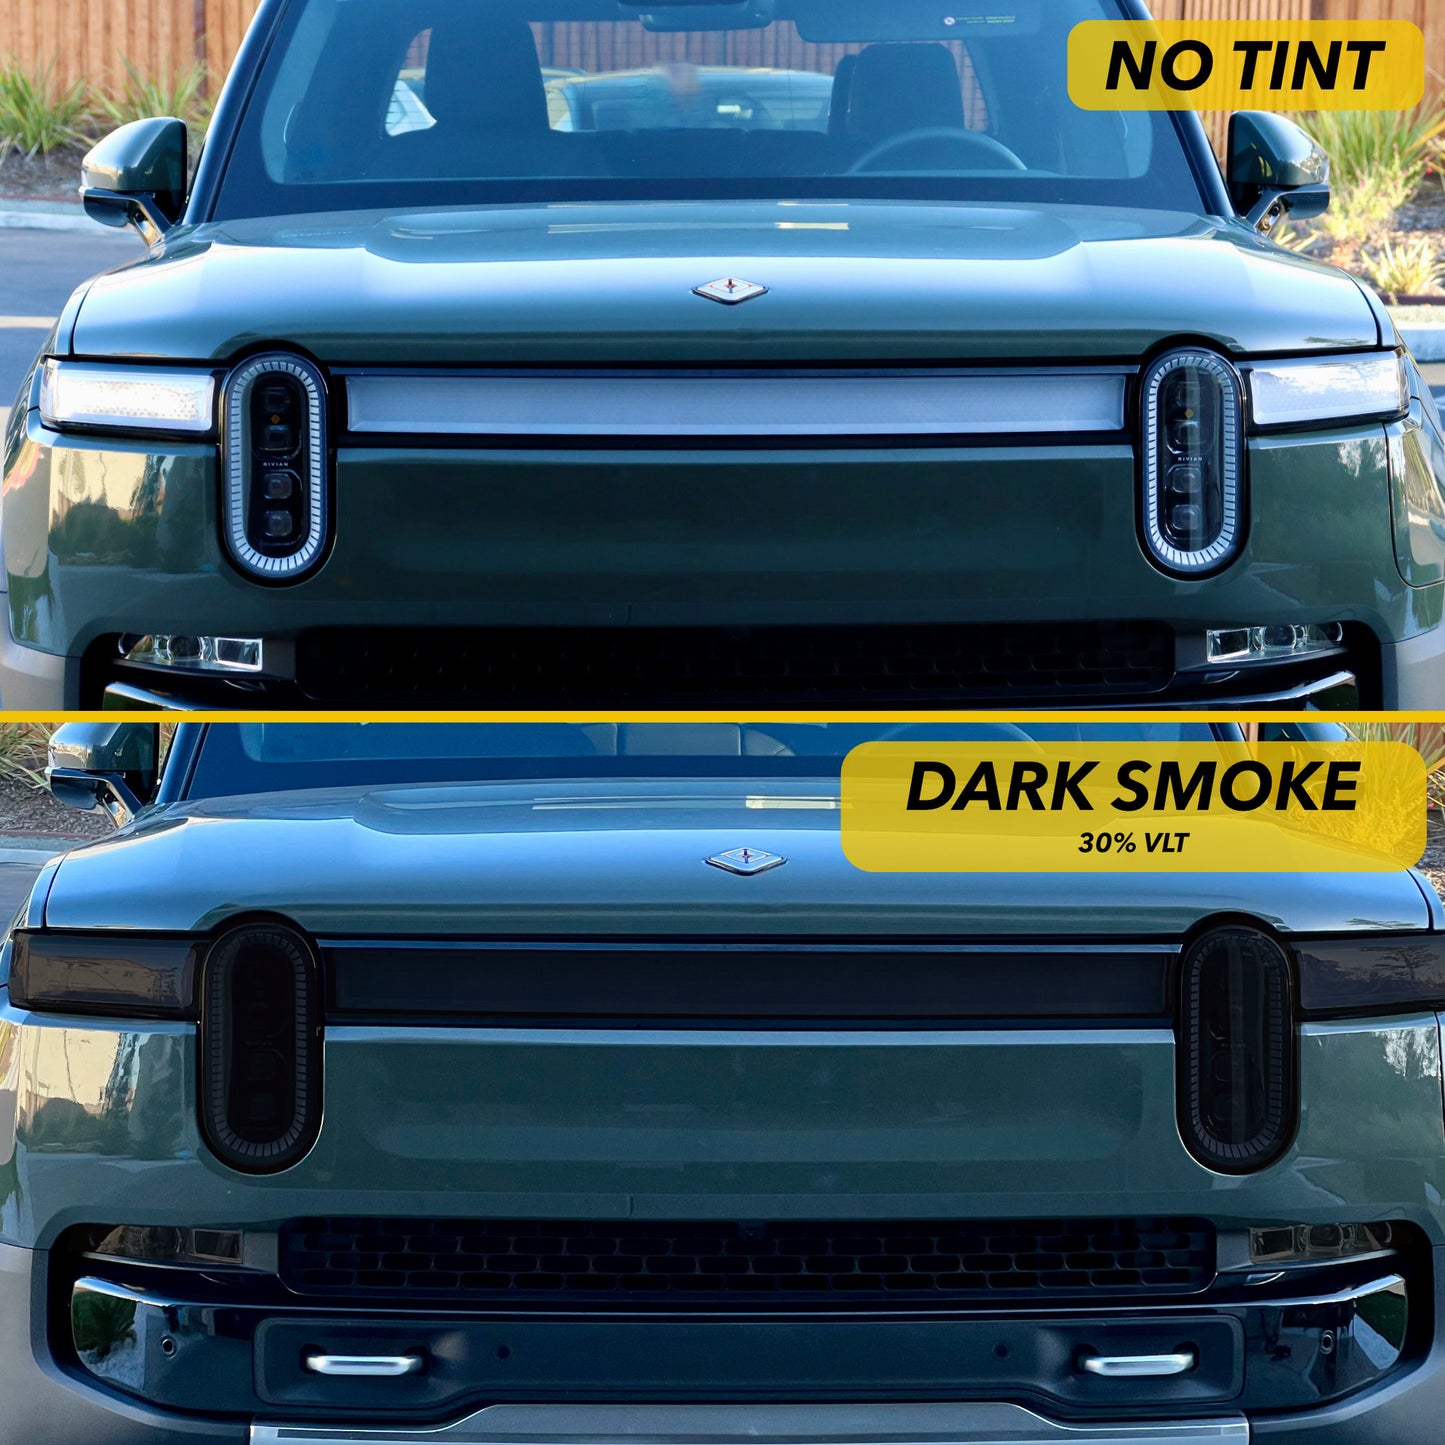 Headlights Clear PPF / Smoke Tint for Rivian R1T & R1S